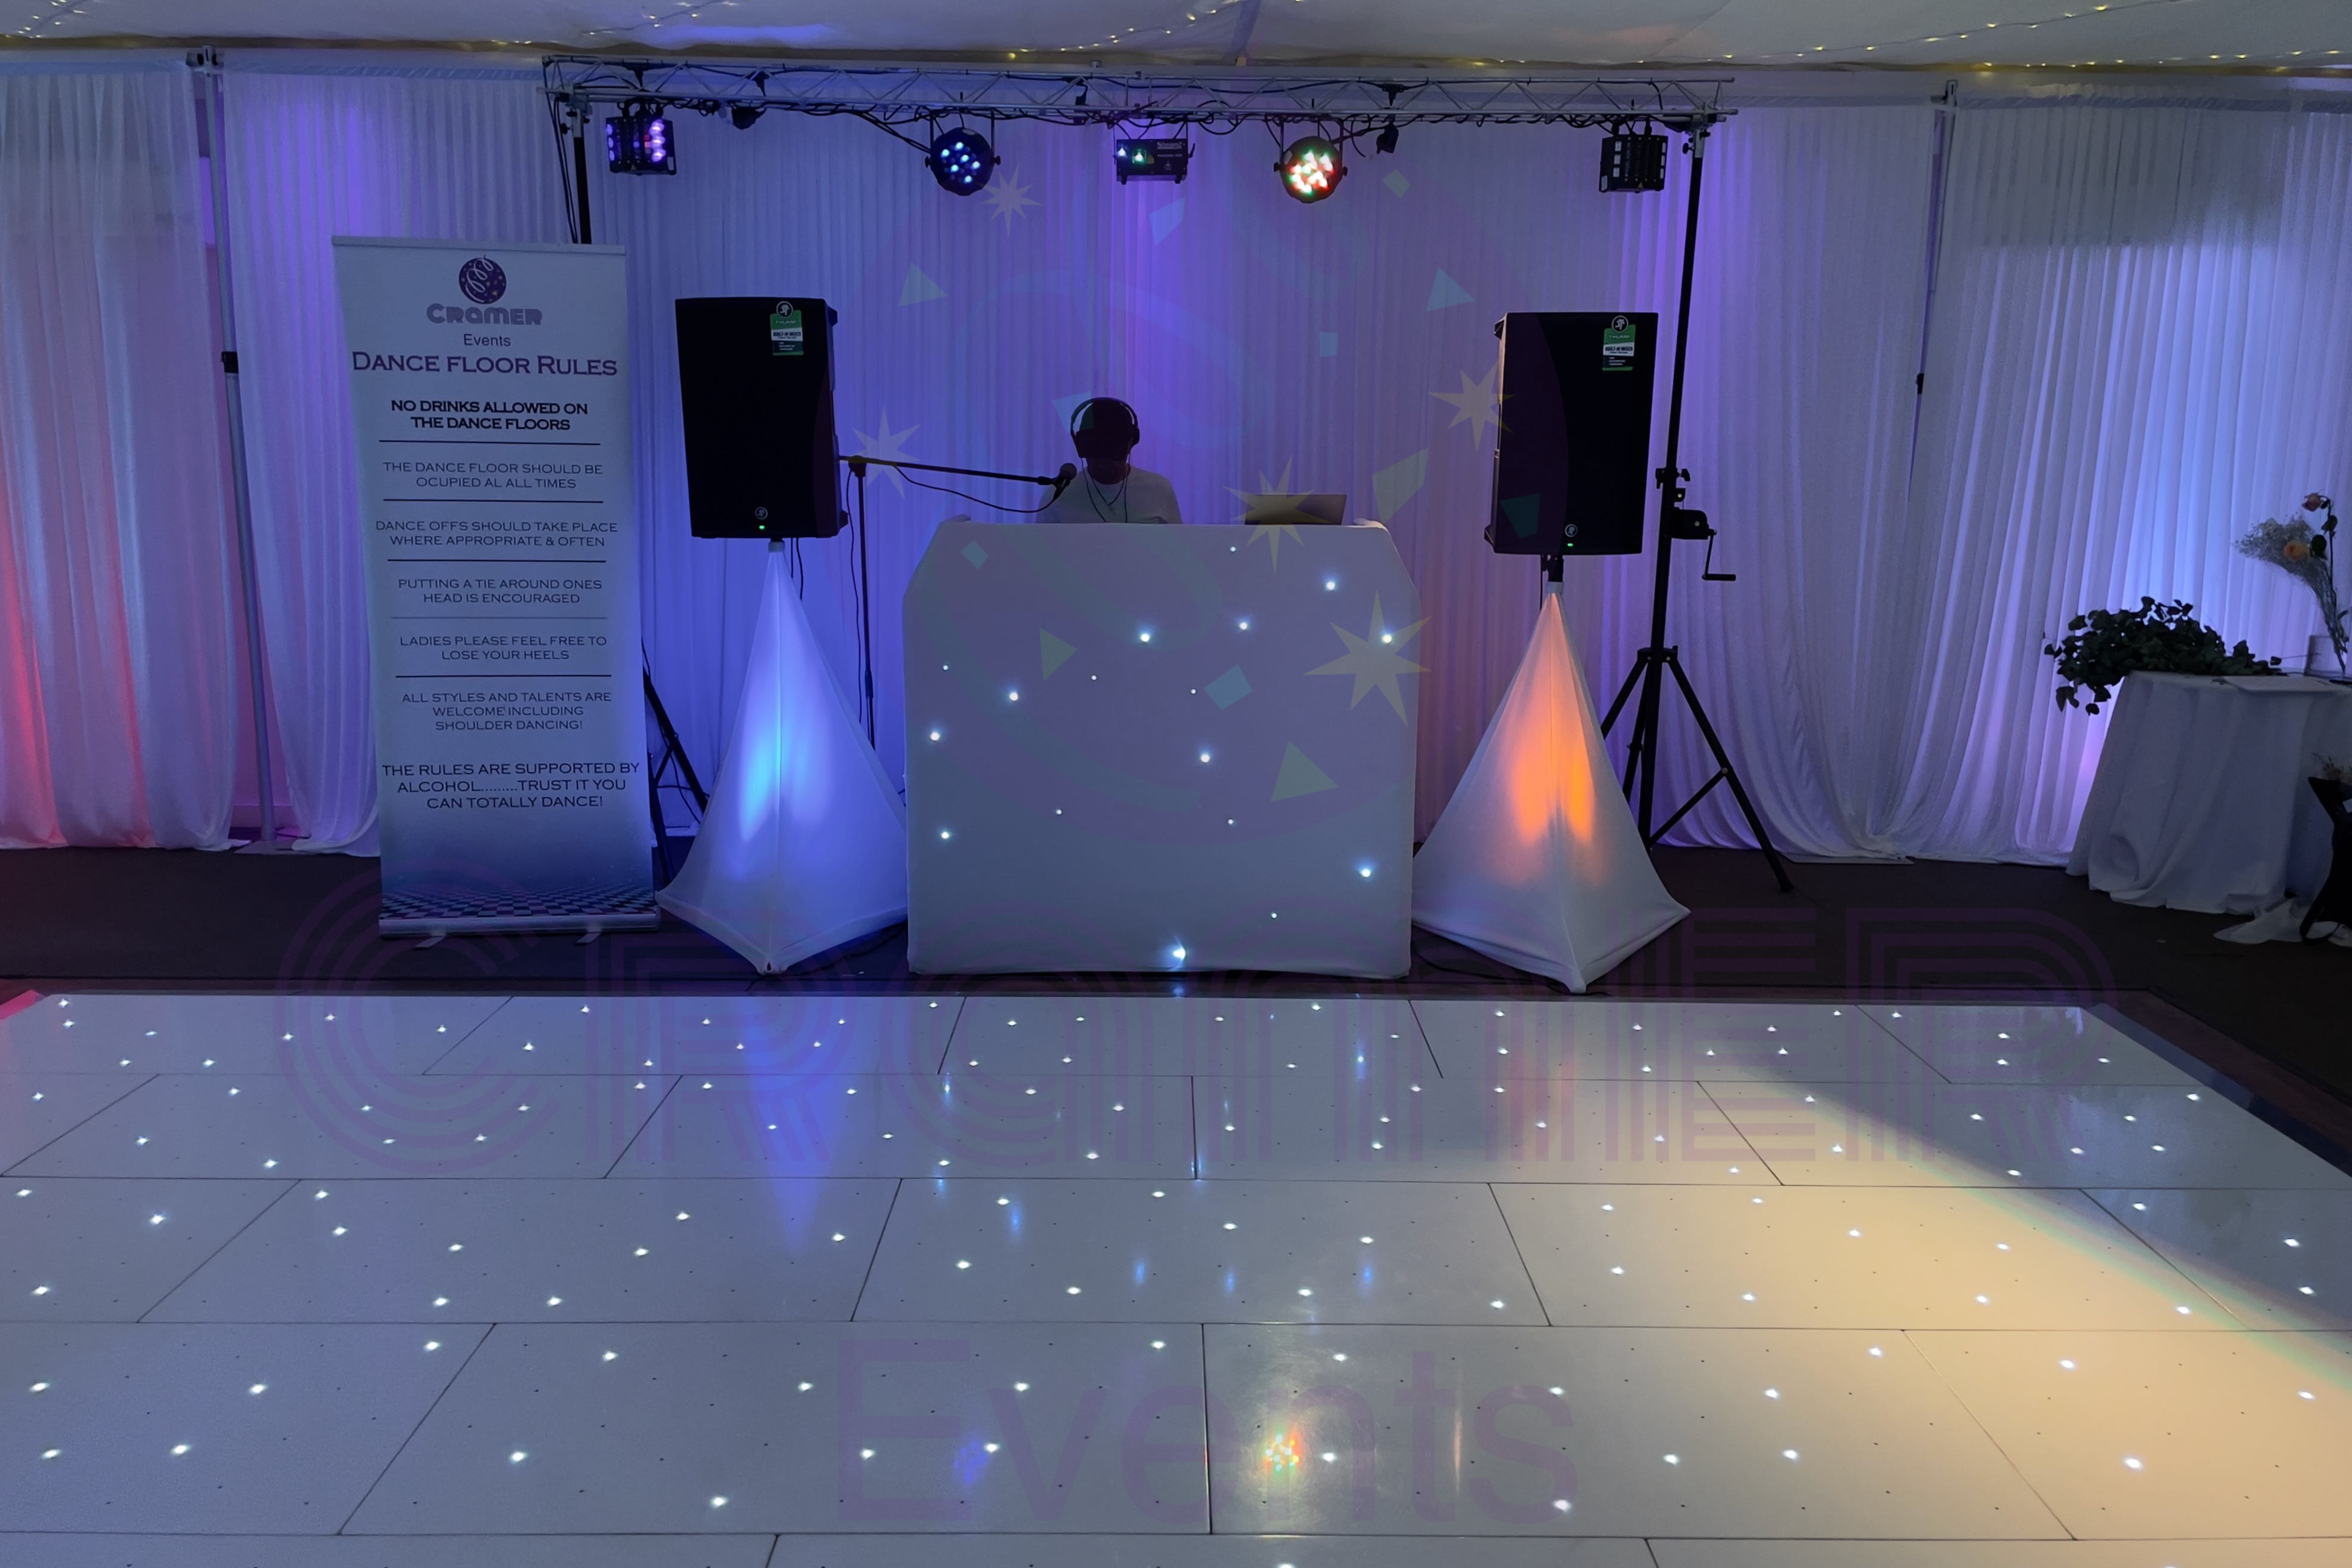 Cramer Events DJ Service and dancefloor at the beaverwood, DJ Snoop behind the booth spinning tunes as the party was starting